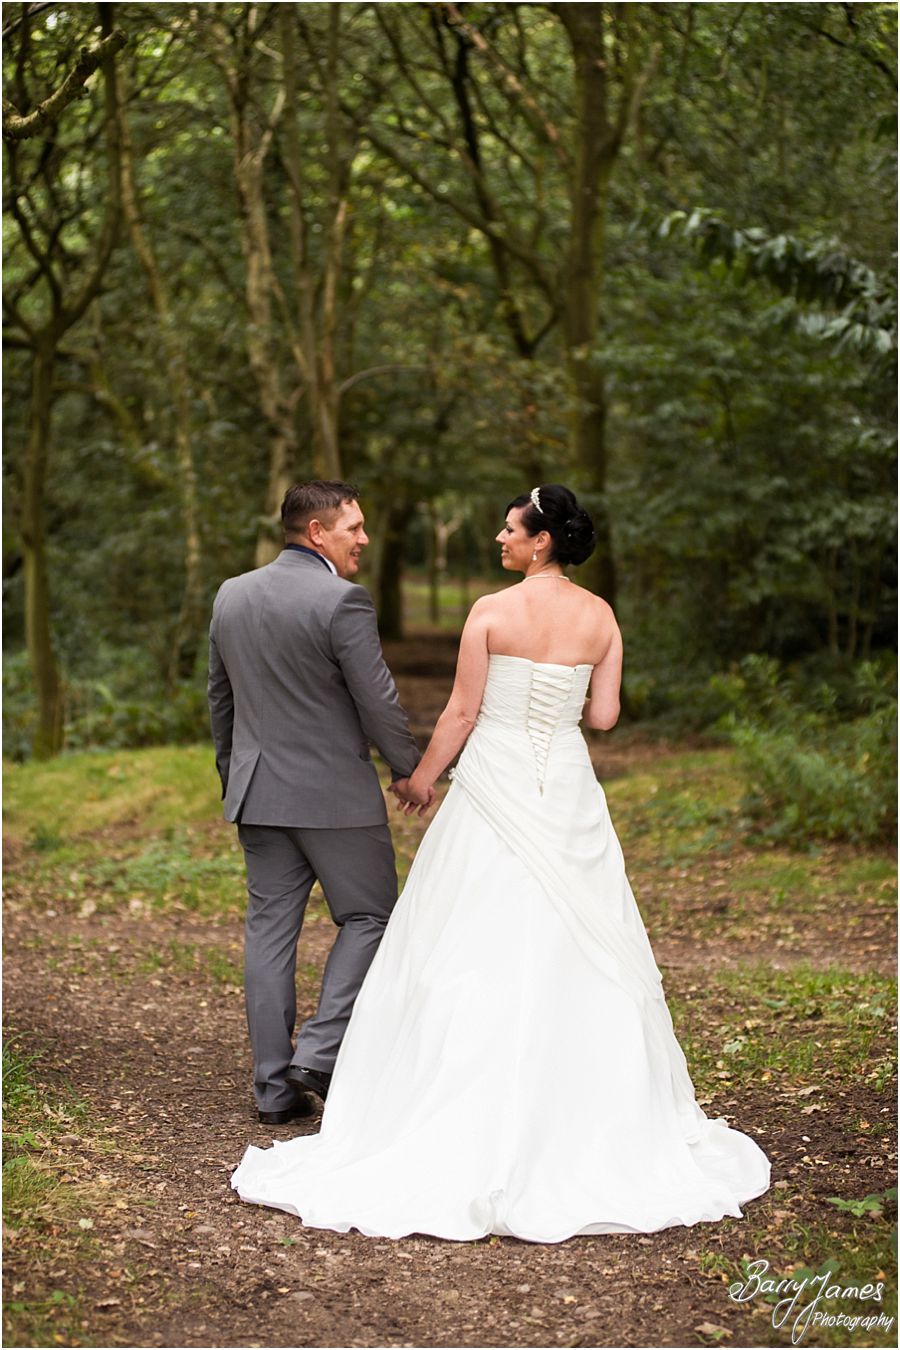 Creative contemporary portraits of Bride and Groom around Shoal Hill in Cannock Chase by Experienced Contemporary Candid and Creative Wedding Photographer Barry James